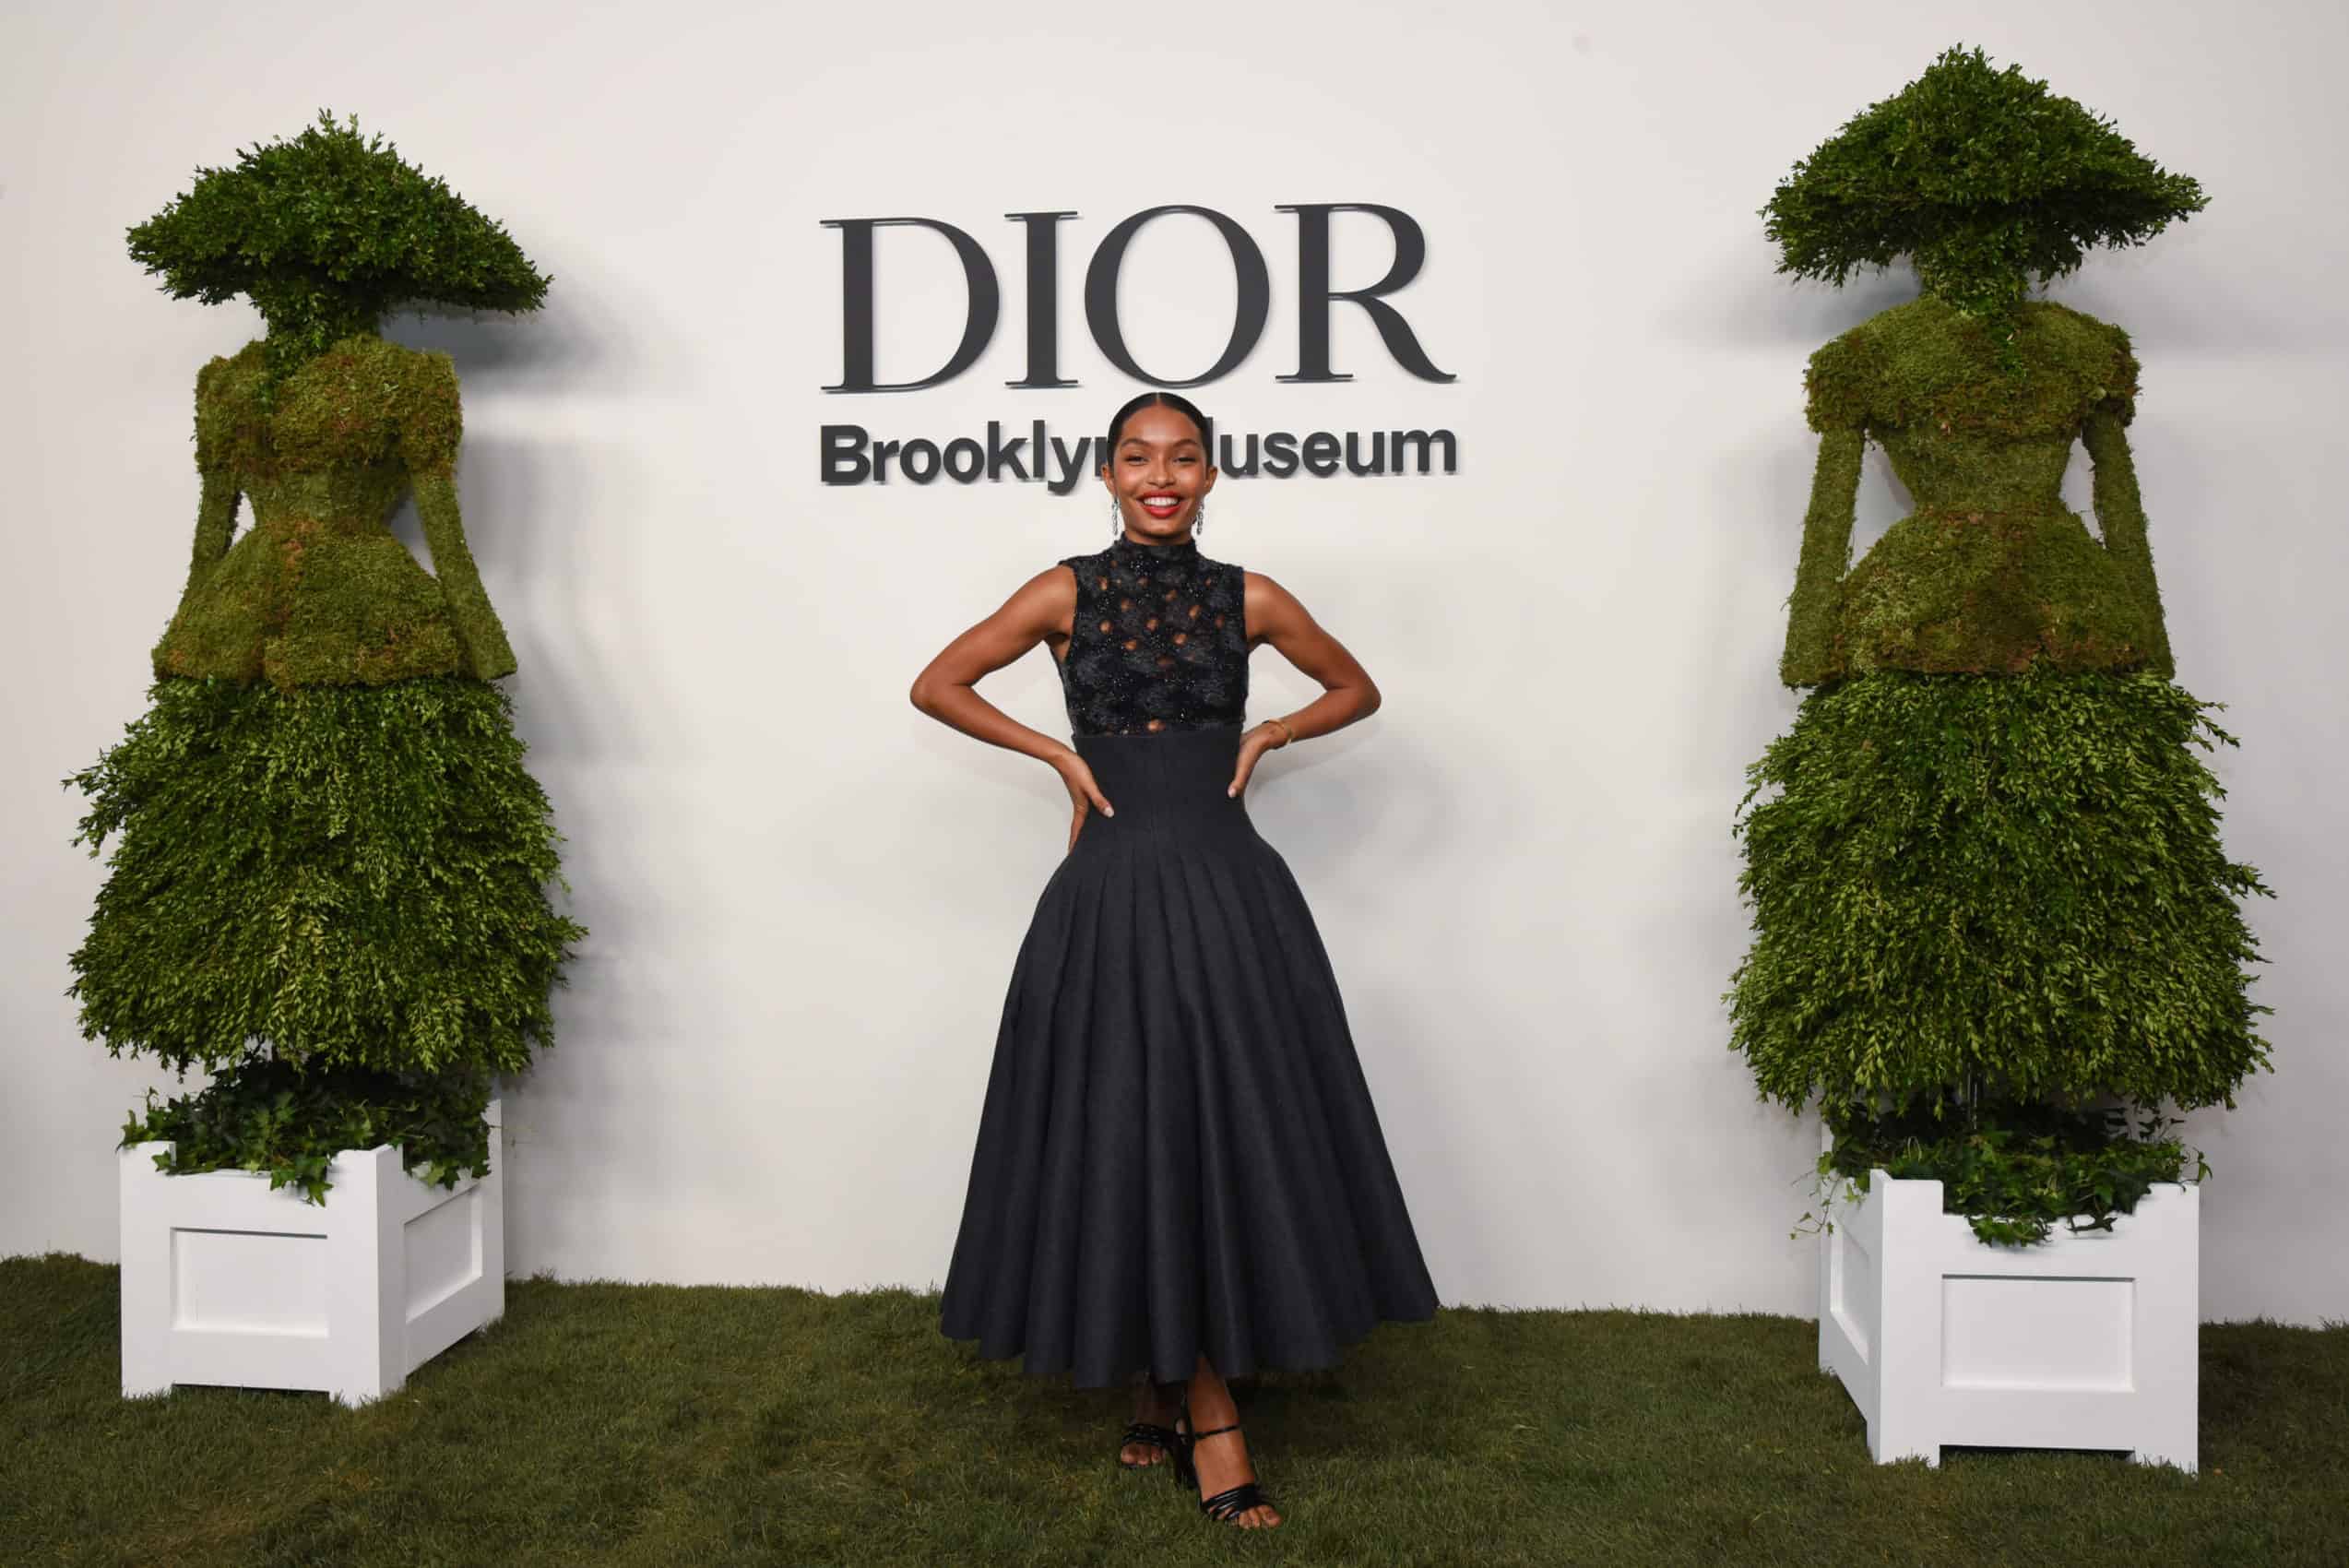 NYFW Parties Are Back! Dior Invites A Listers To Brooklyn Museum